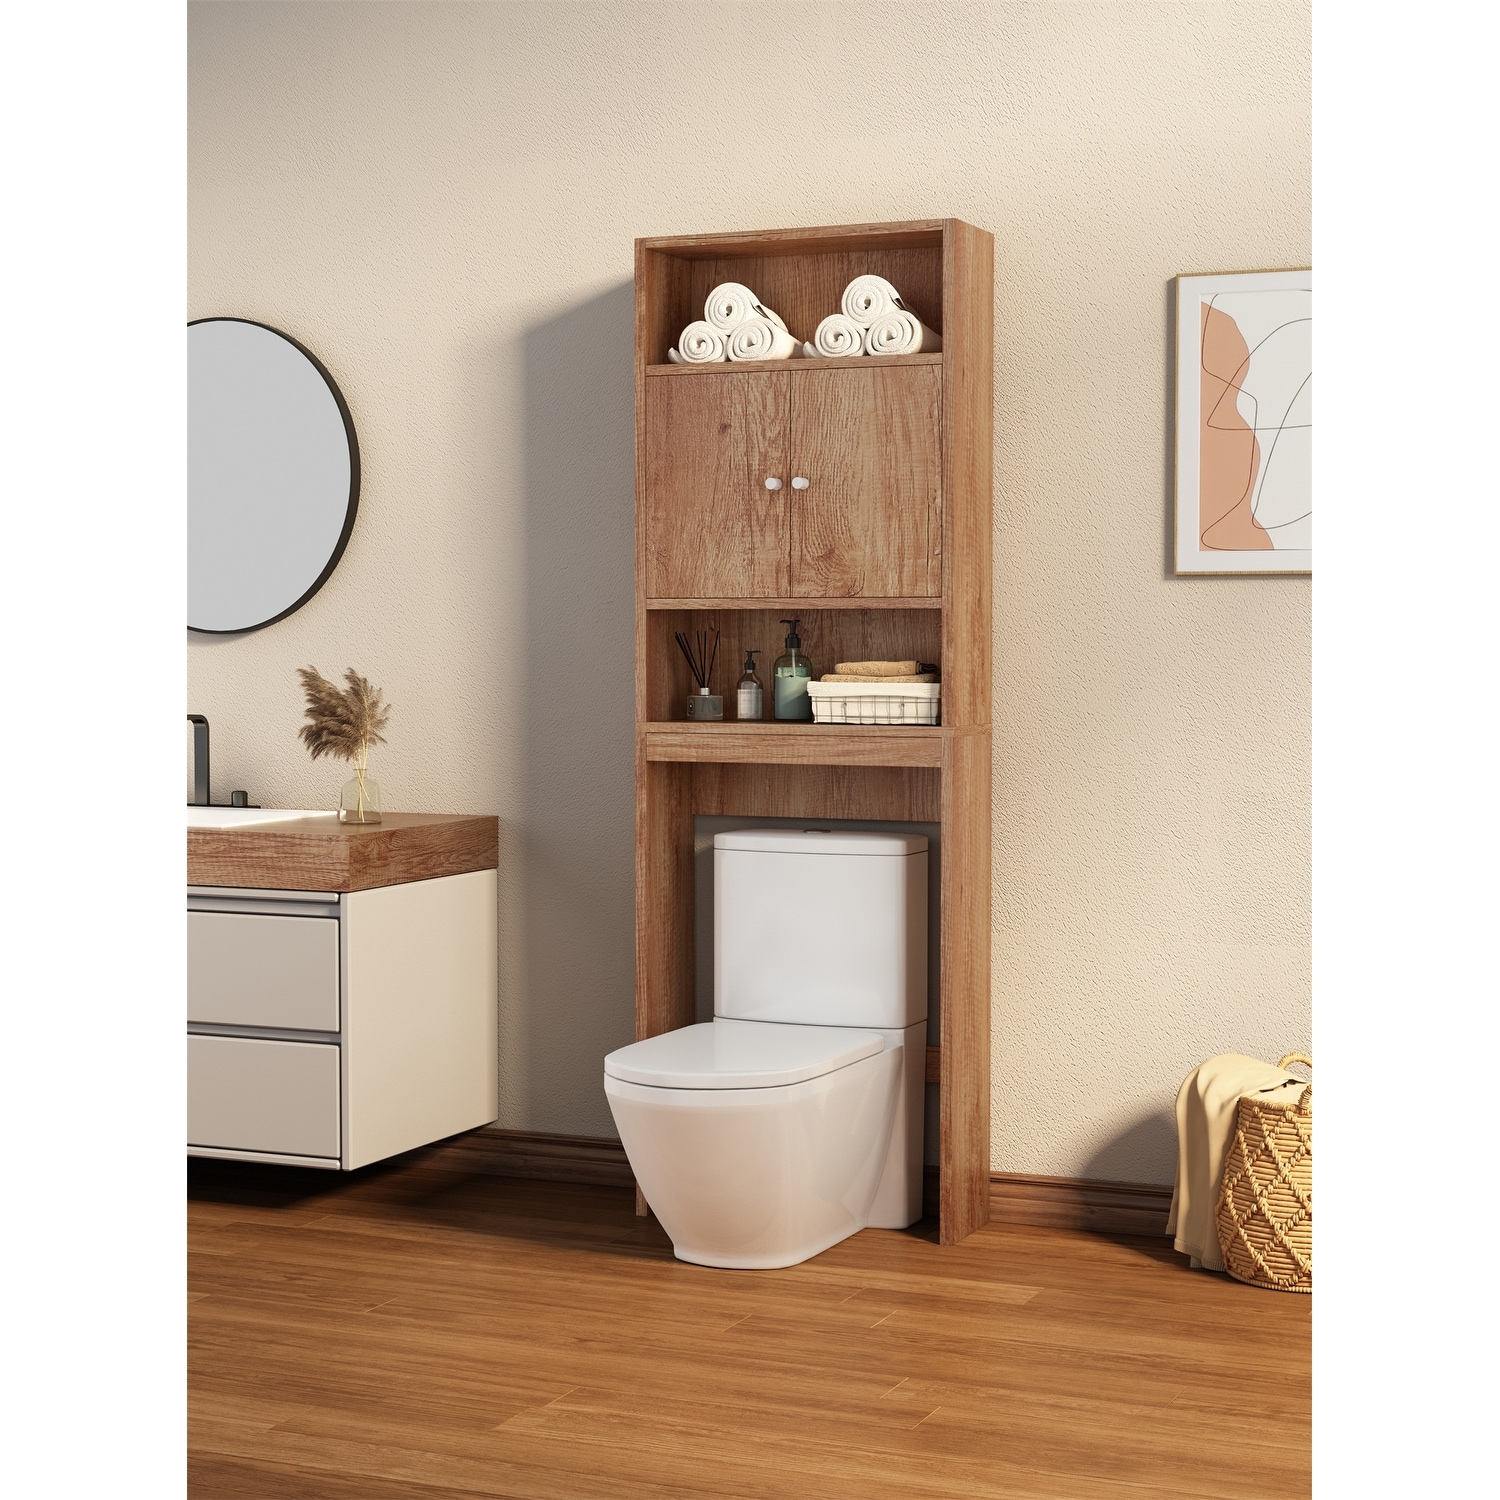 https://ak1.ostkcdn.com/images/products/is/images/direct/75ac0ead023c464939017fa287c825289fa1d3ec/Bathroom-Shelf-Accent-Cabinet-Toilet-Standing-Cabinet-with-2-Door%2C-Gap-Storage-Rack-Side-Storage-Organizer-Paper-Holder.jpg